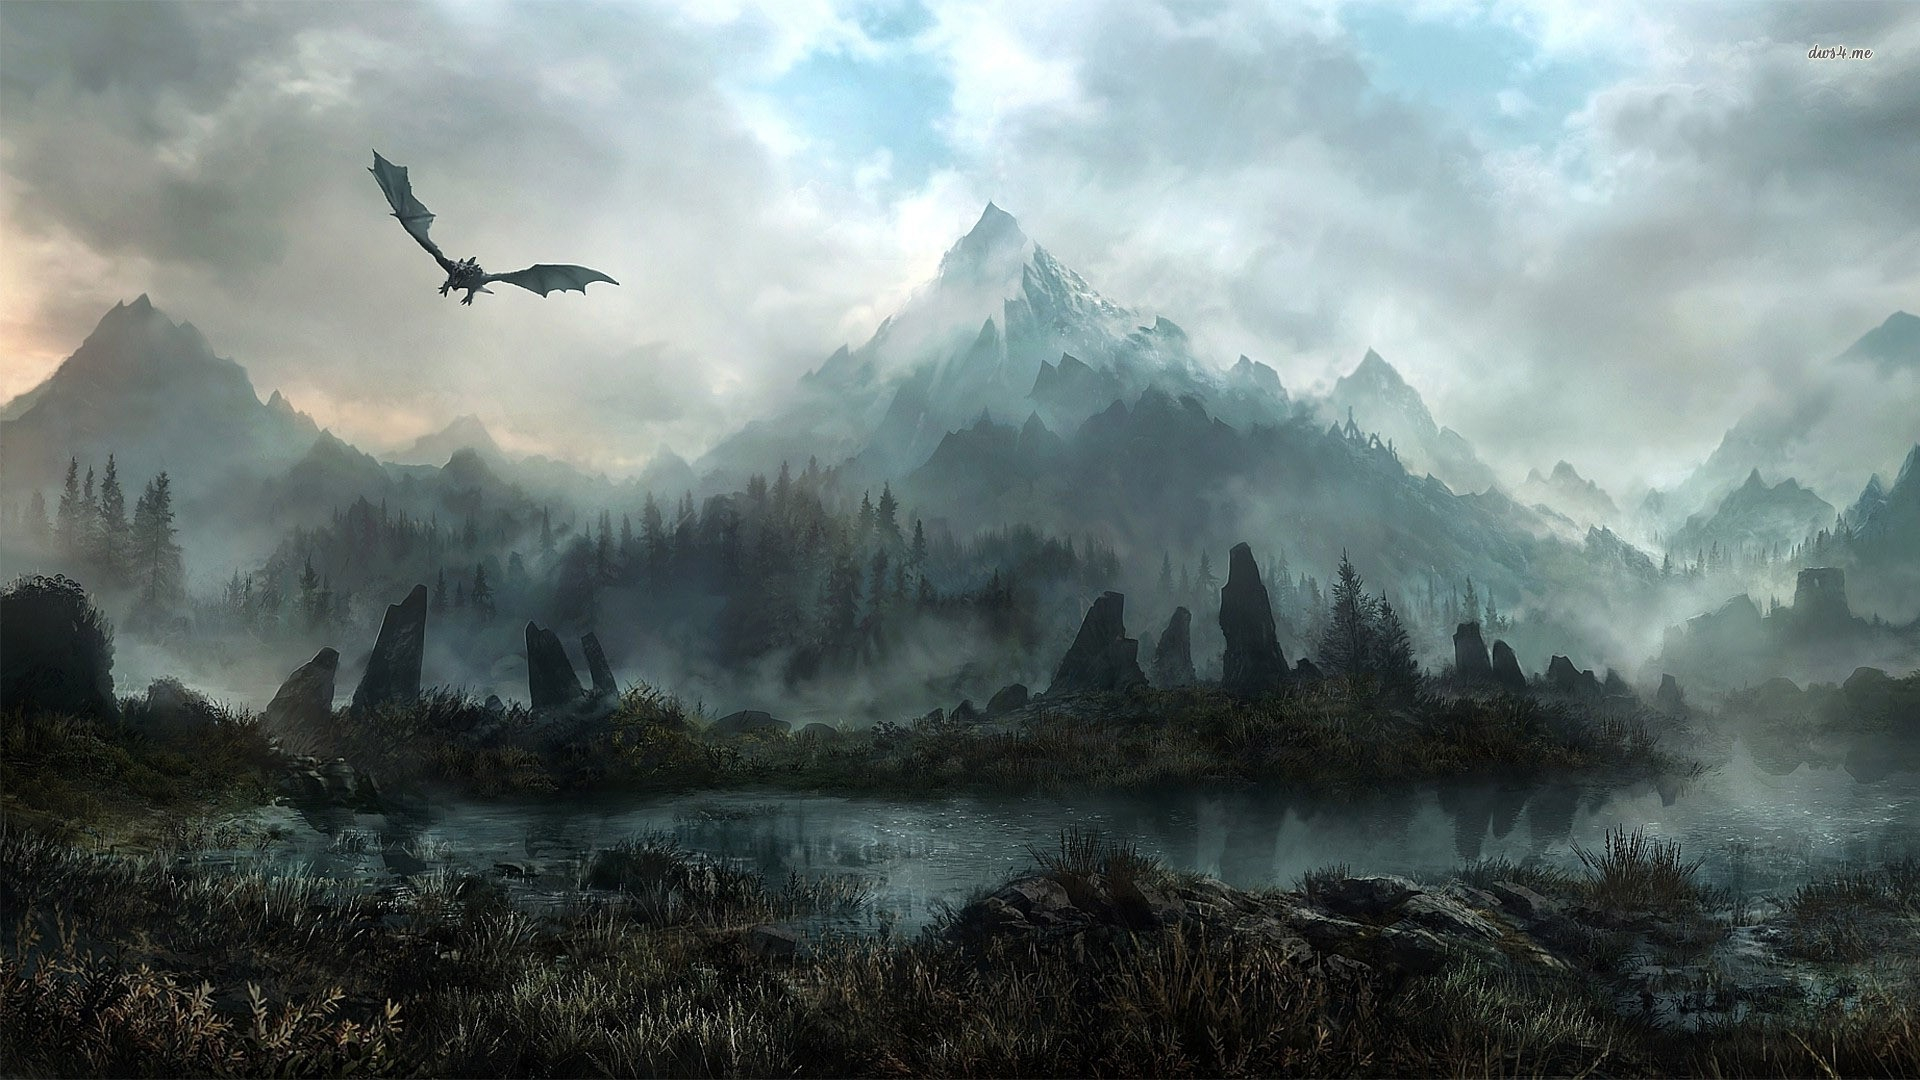 1920x1080 Skyrim HD wallpaper &Acirc;&middot;&acirc;&#145;&nbsp; Download free beautiful High Resolution wallpapers for desktop and mobile devices in any resolution: desktop, Android, iPhone, iPad , 2560x1440, 320x480, 1920x1200 etc.